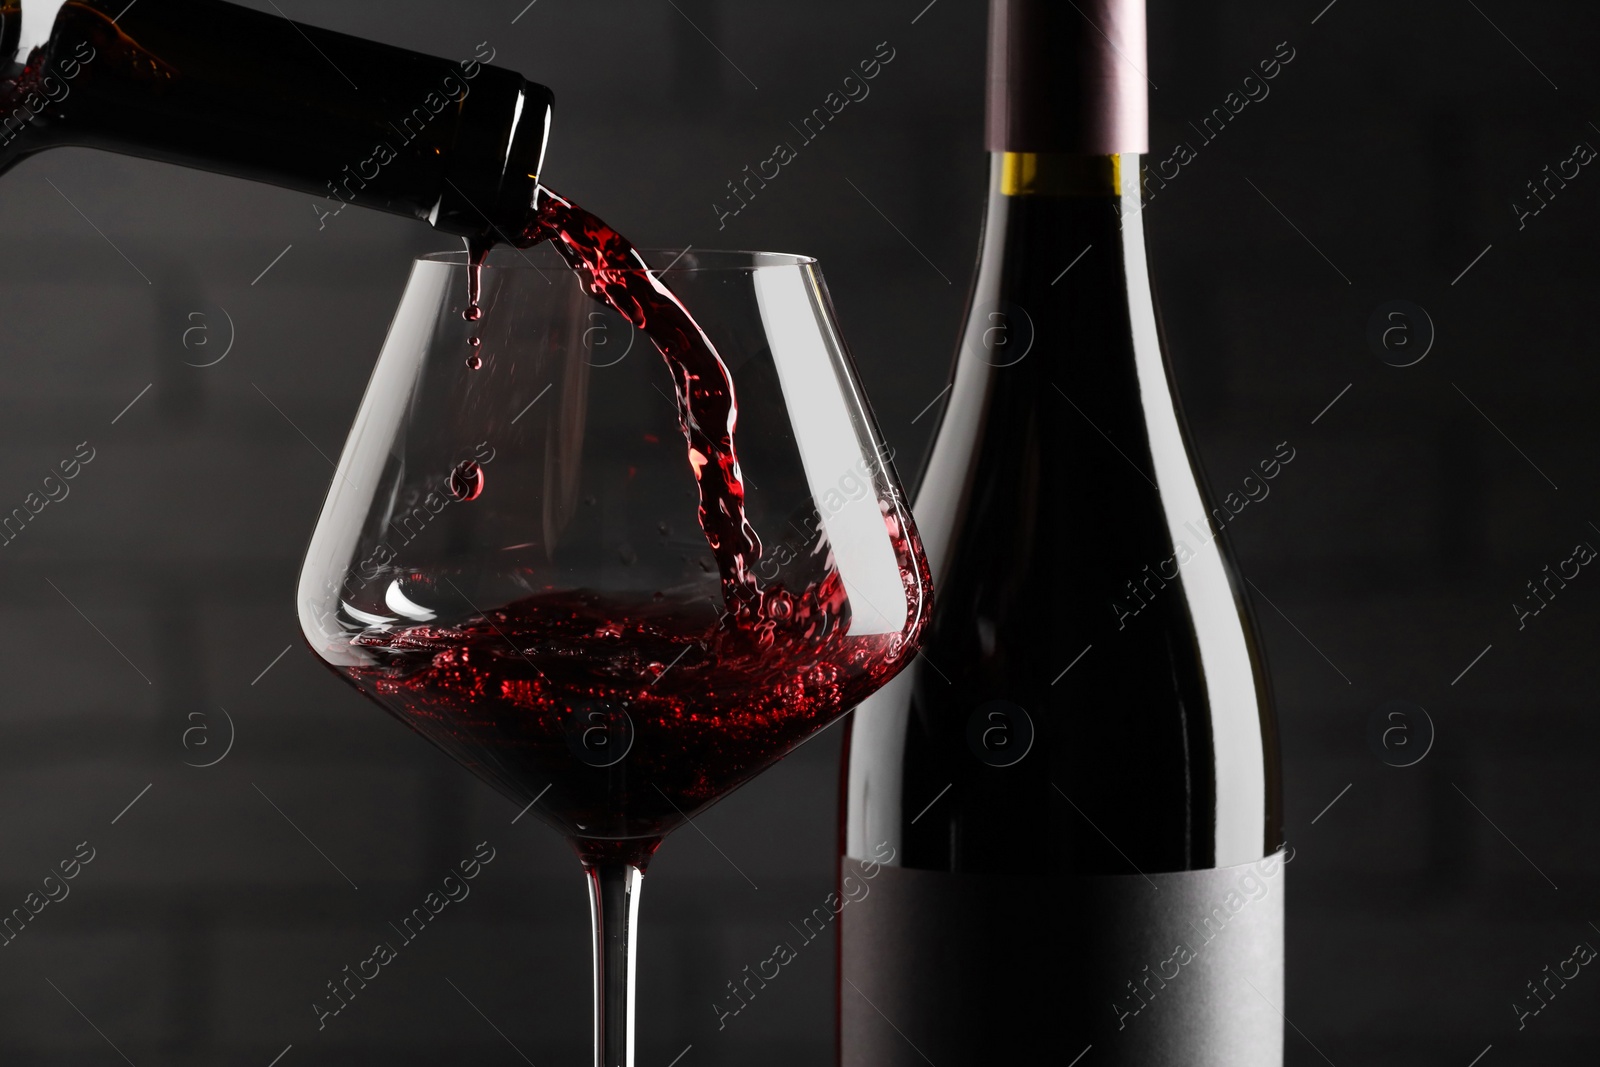 Photo of Pouring red wine into glass and bottles against brick wall background, closeup